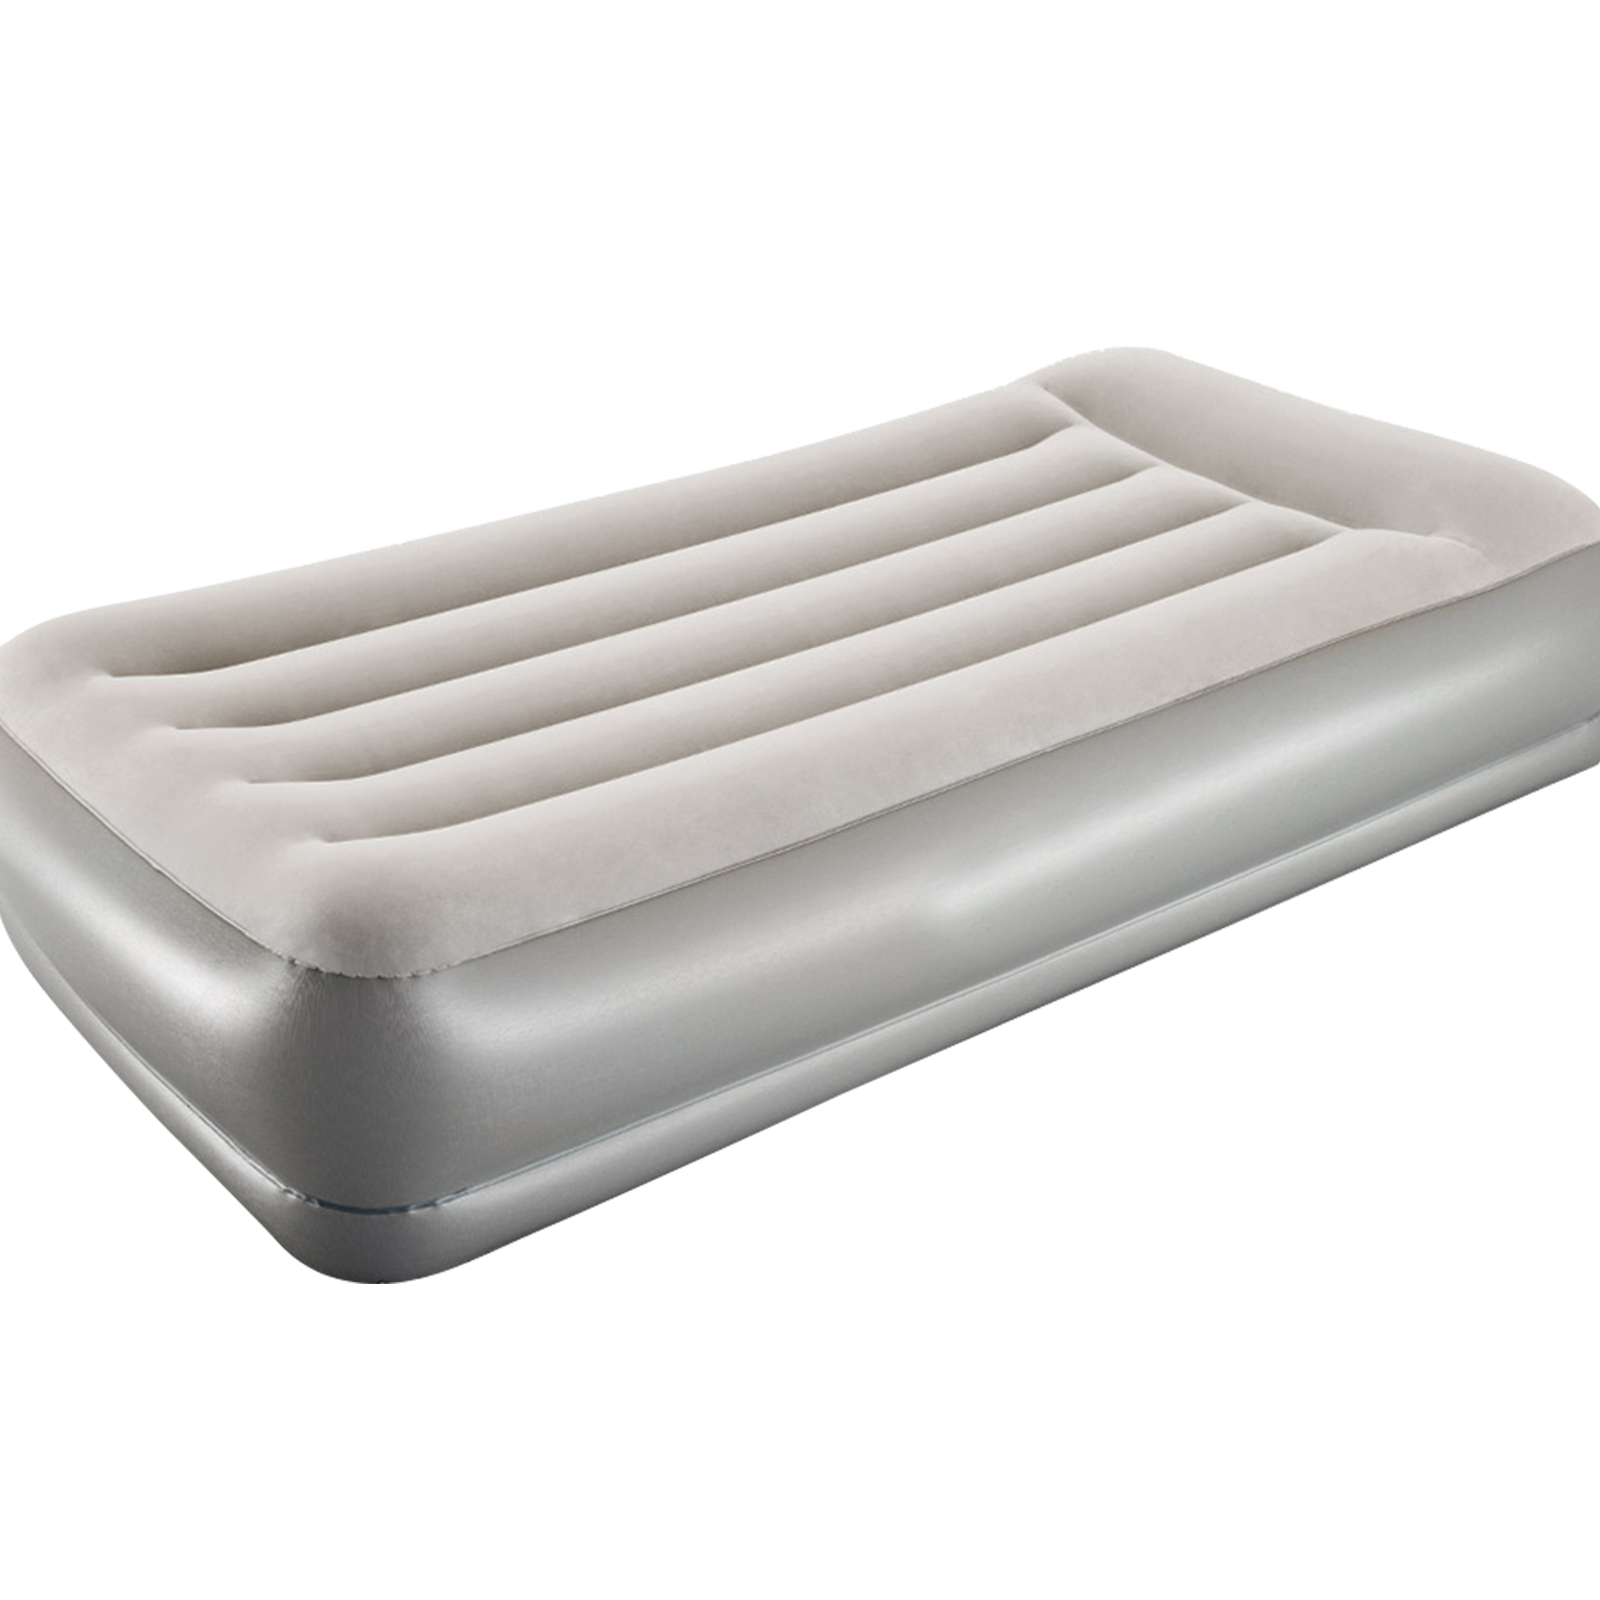 Single Size Air Bed Inflatable Mattress Built-In Electric Pump 38CM - Grey